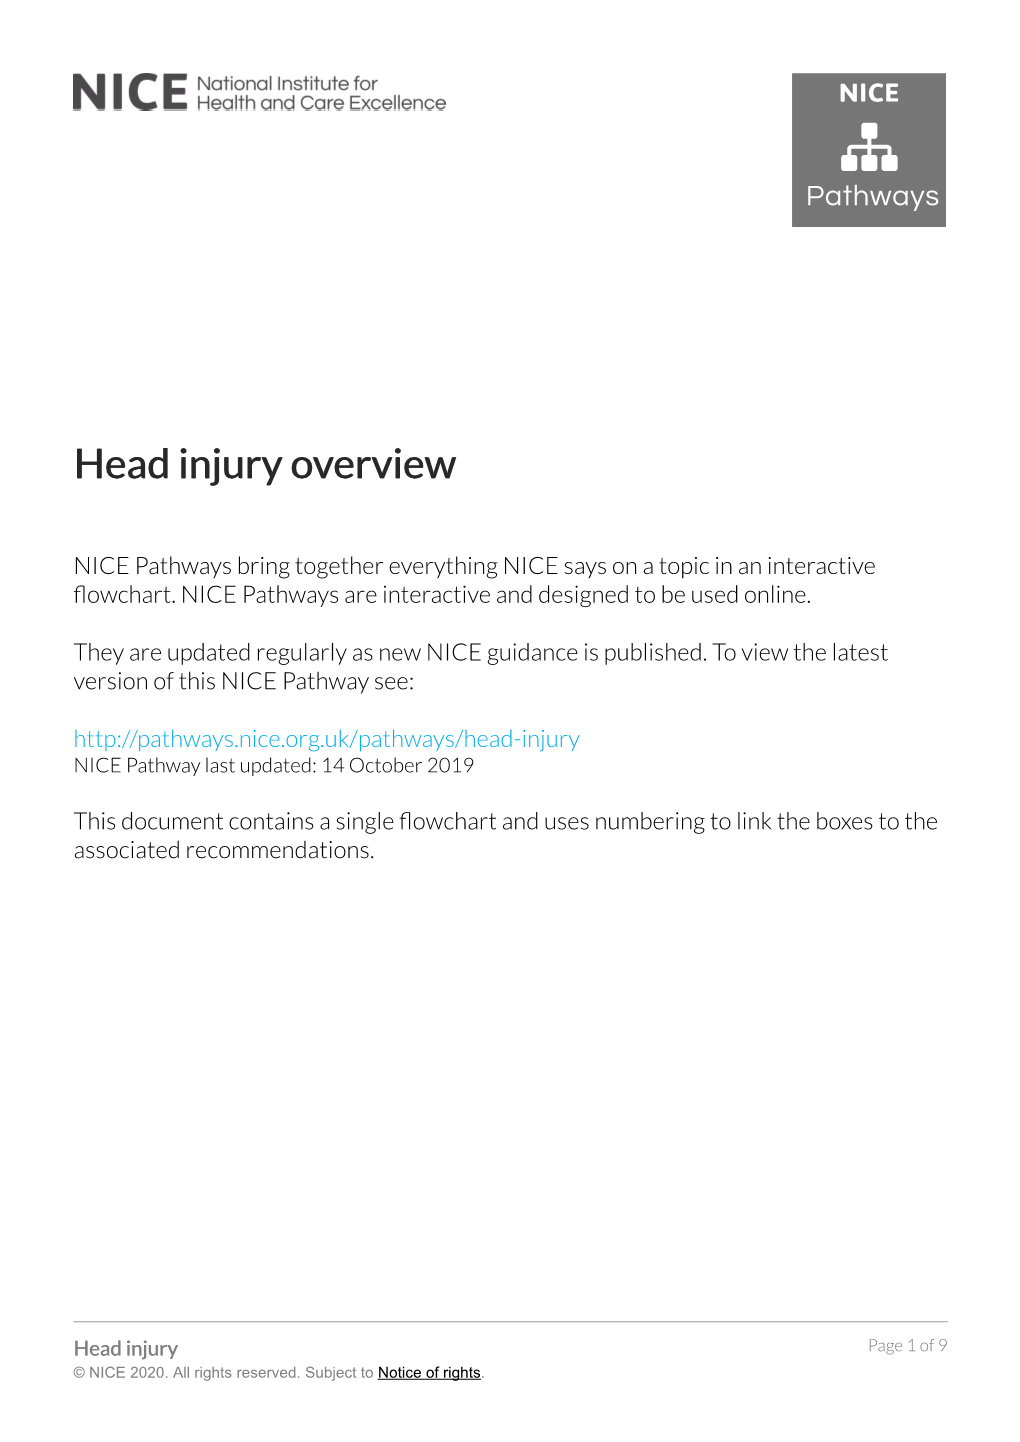 NICE Pathway: Head Injury Overview